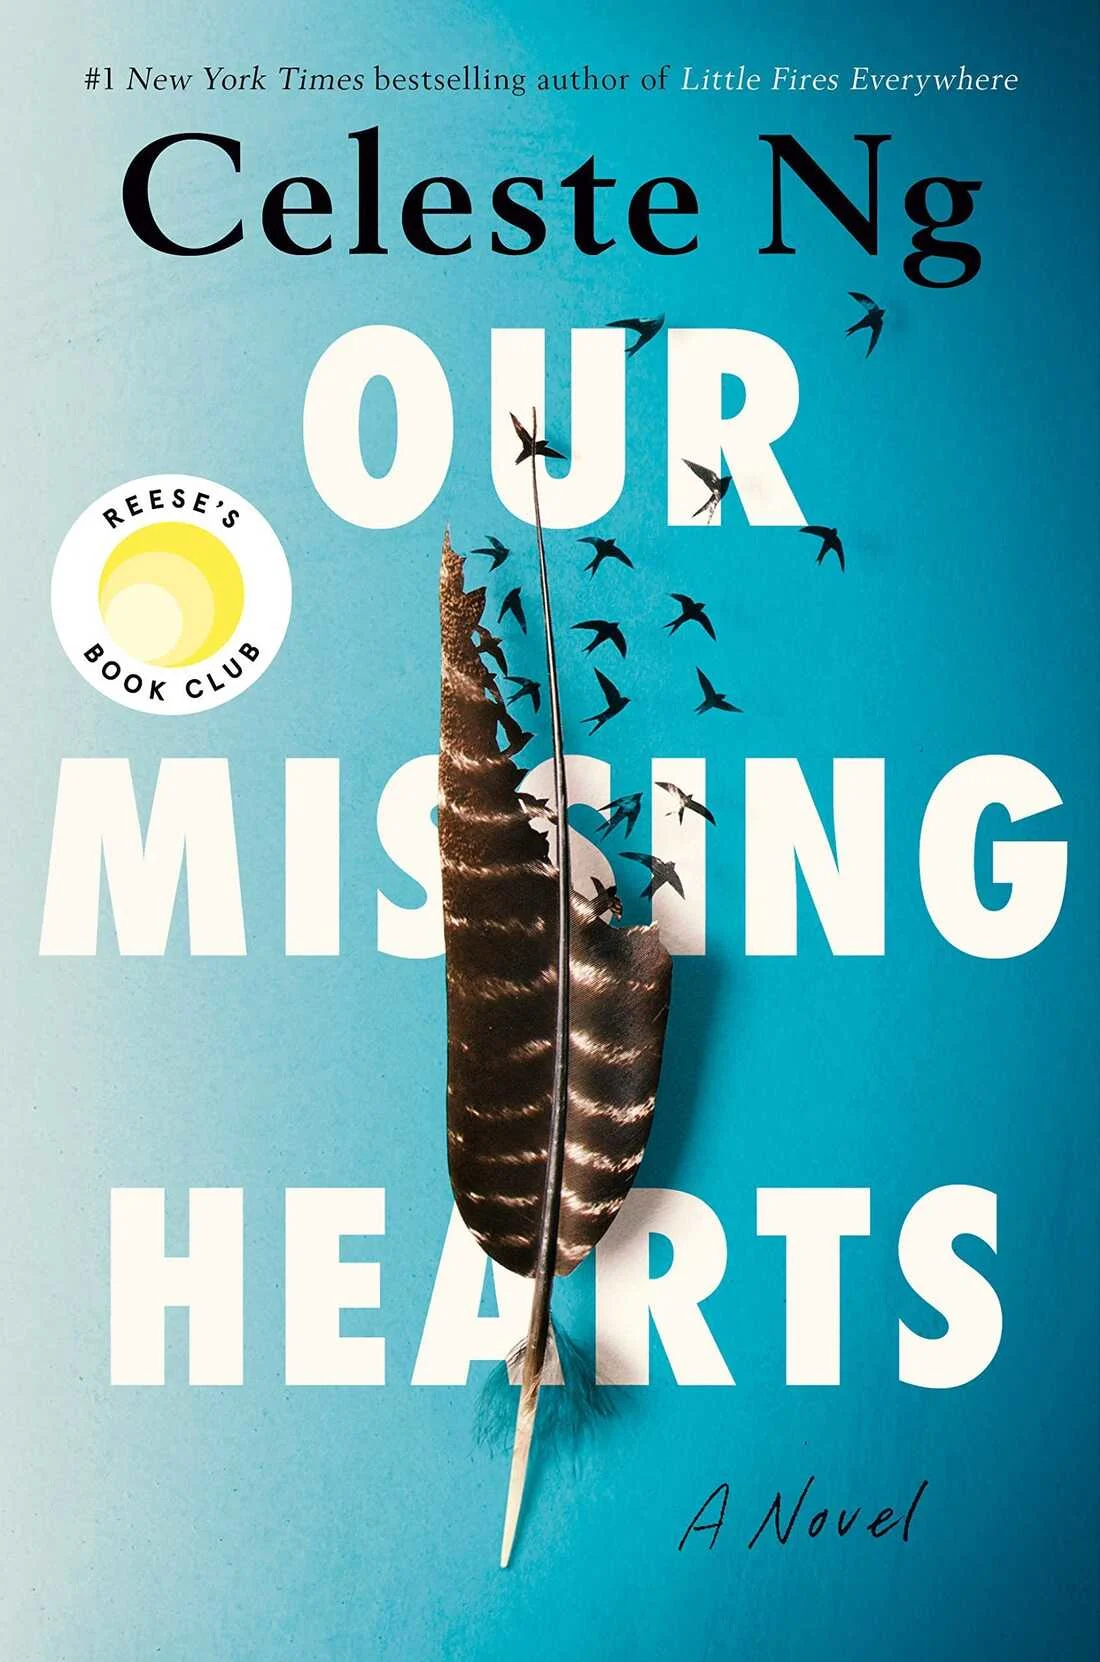 a feather disintegrating into birds on a blue ombre background.  ugh reese witherspoon vouches for this book for some reason